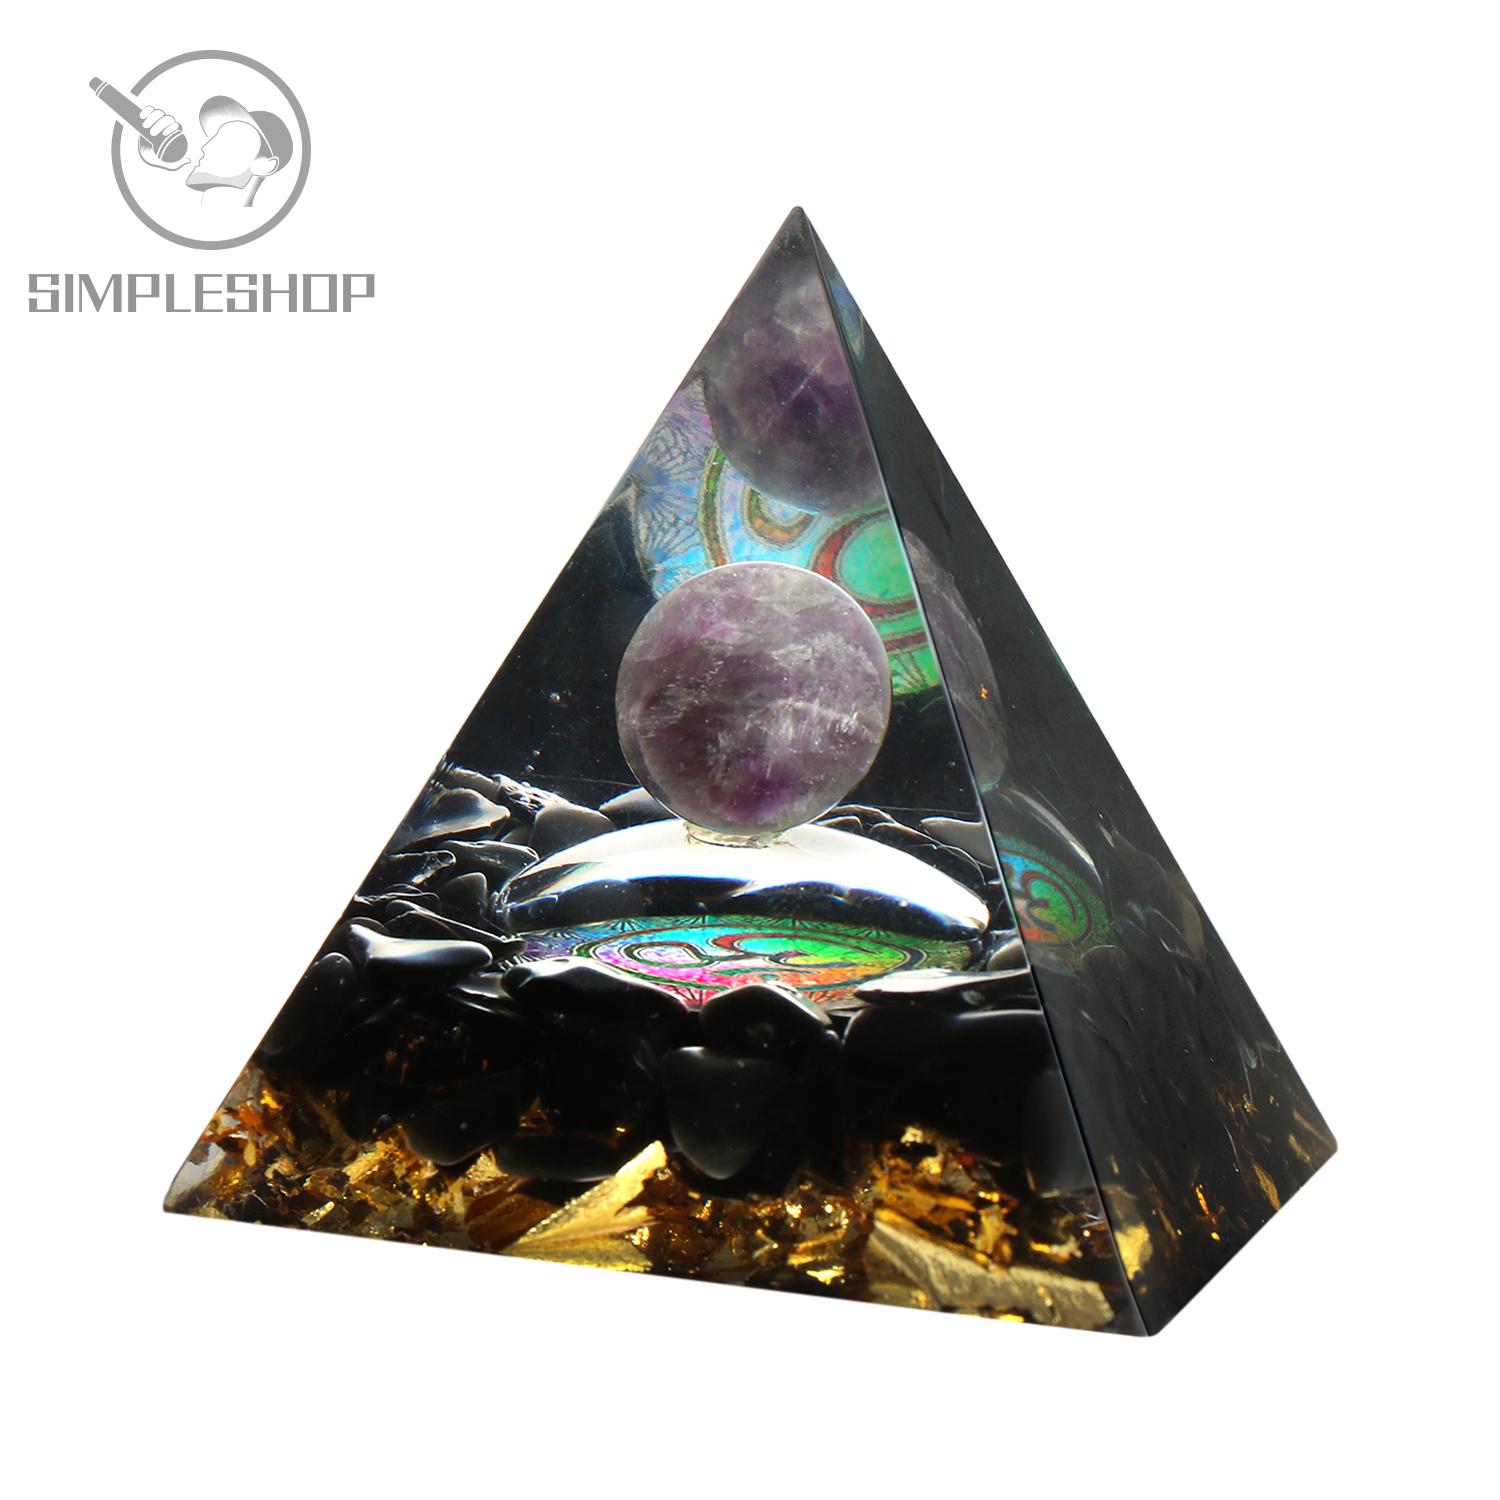 ❀SIMPLE❀ Shelf Decor Orgone Pyramid Spirtual Things|Decor Positive Energy Generator Chakra|Orgonite Boost Immune System Hand Craft Gifts for Women with Obsidian|EMF Protection – Healing